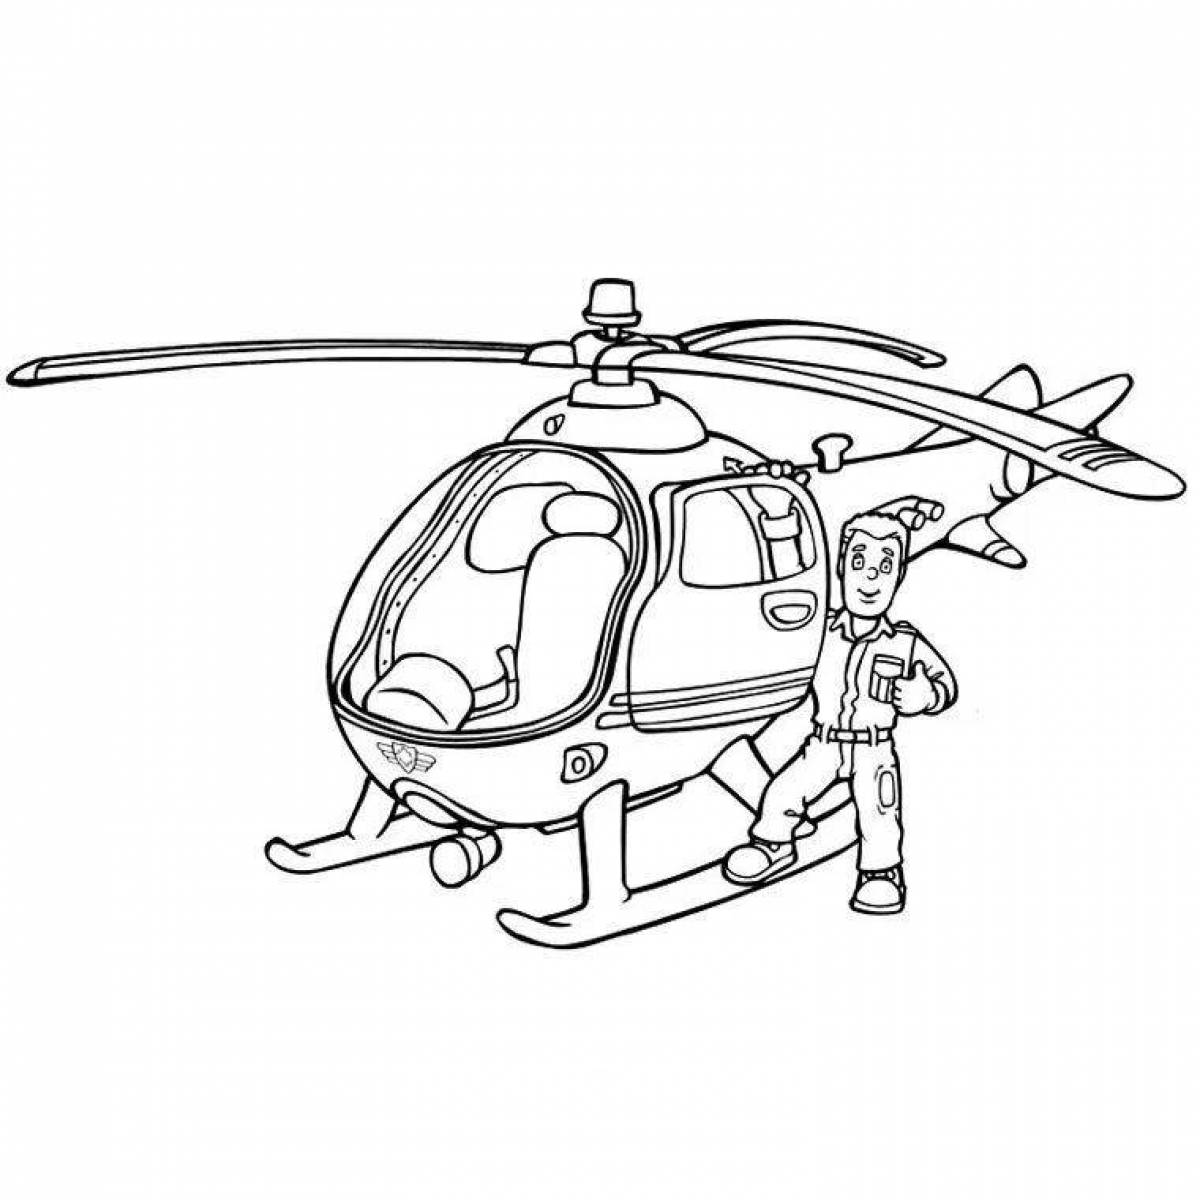 Adorable Police Helicopter Coloring Page